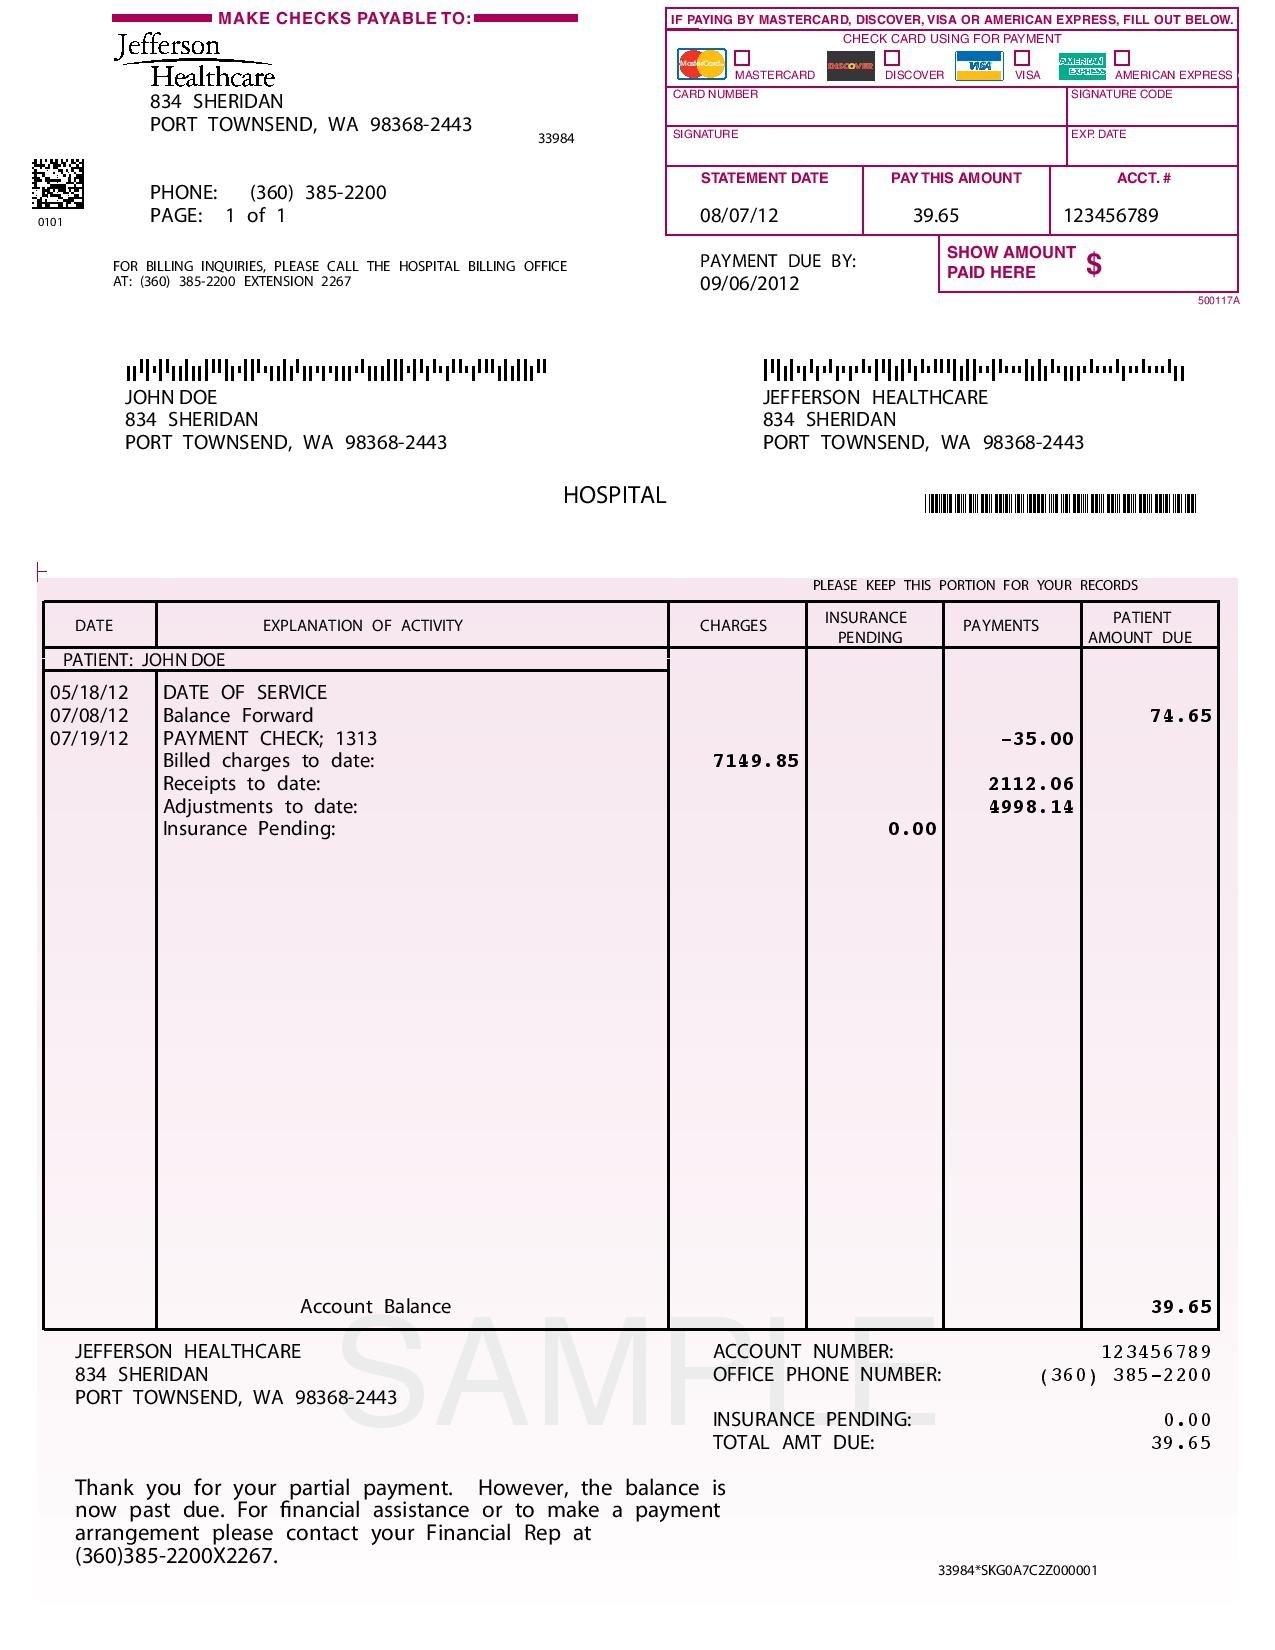 Sample Invoice With Terms